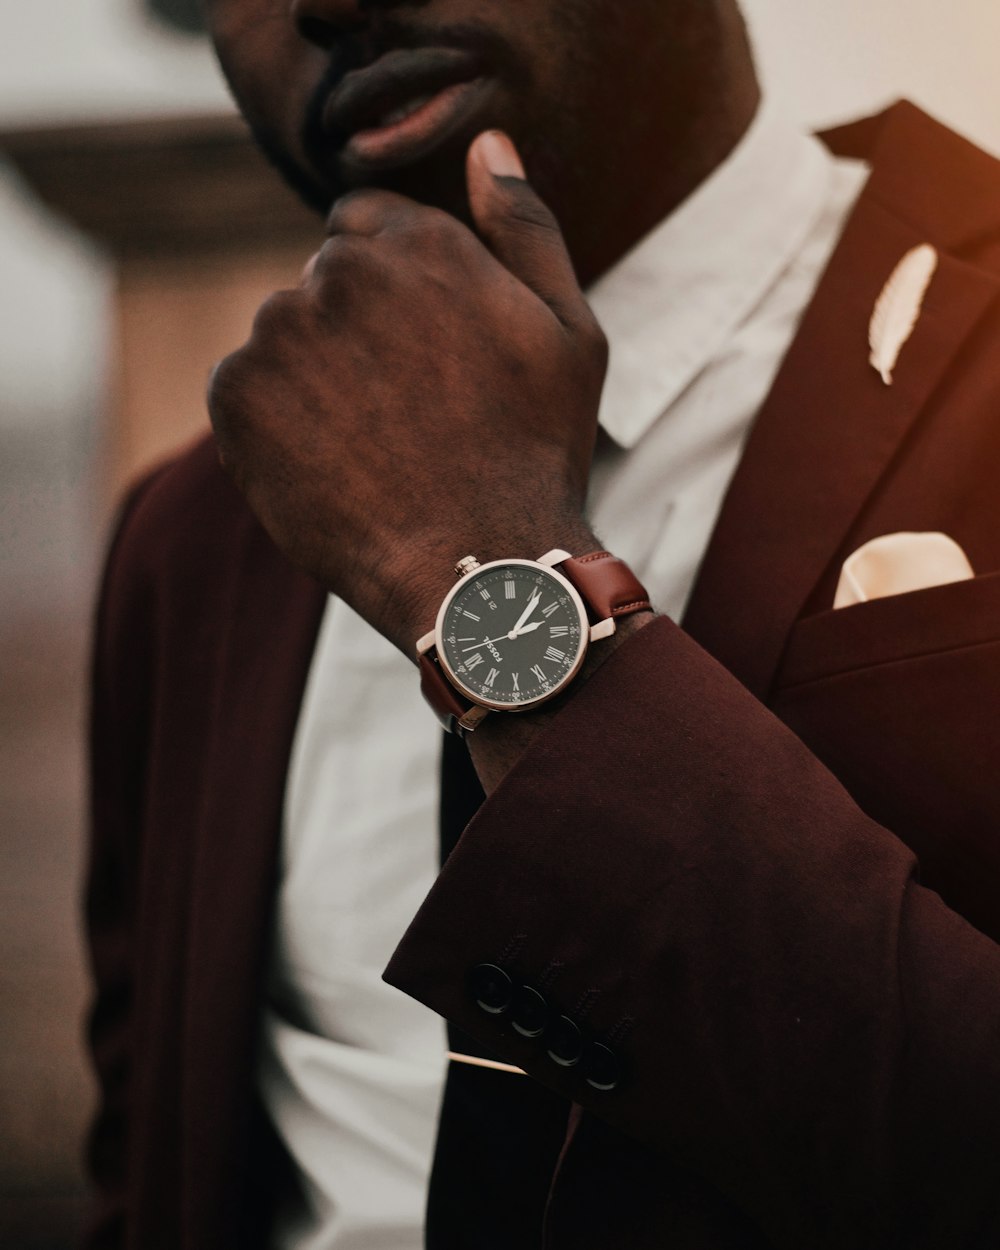 man wearing round silver-colored analog watch and brown suit jacket